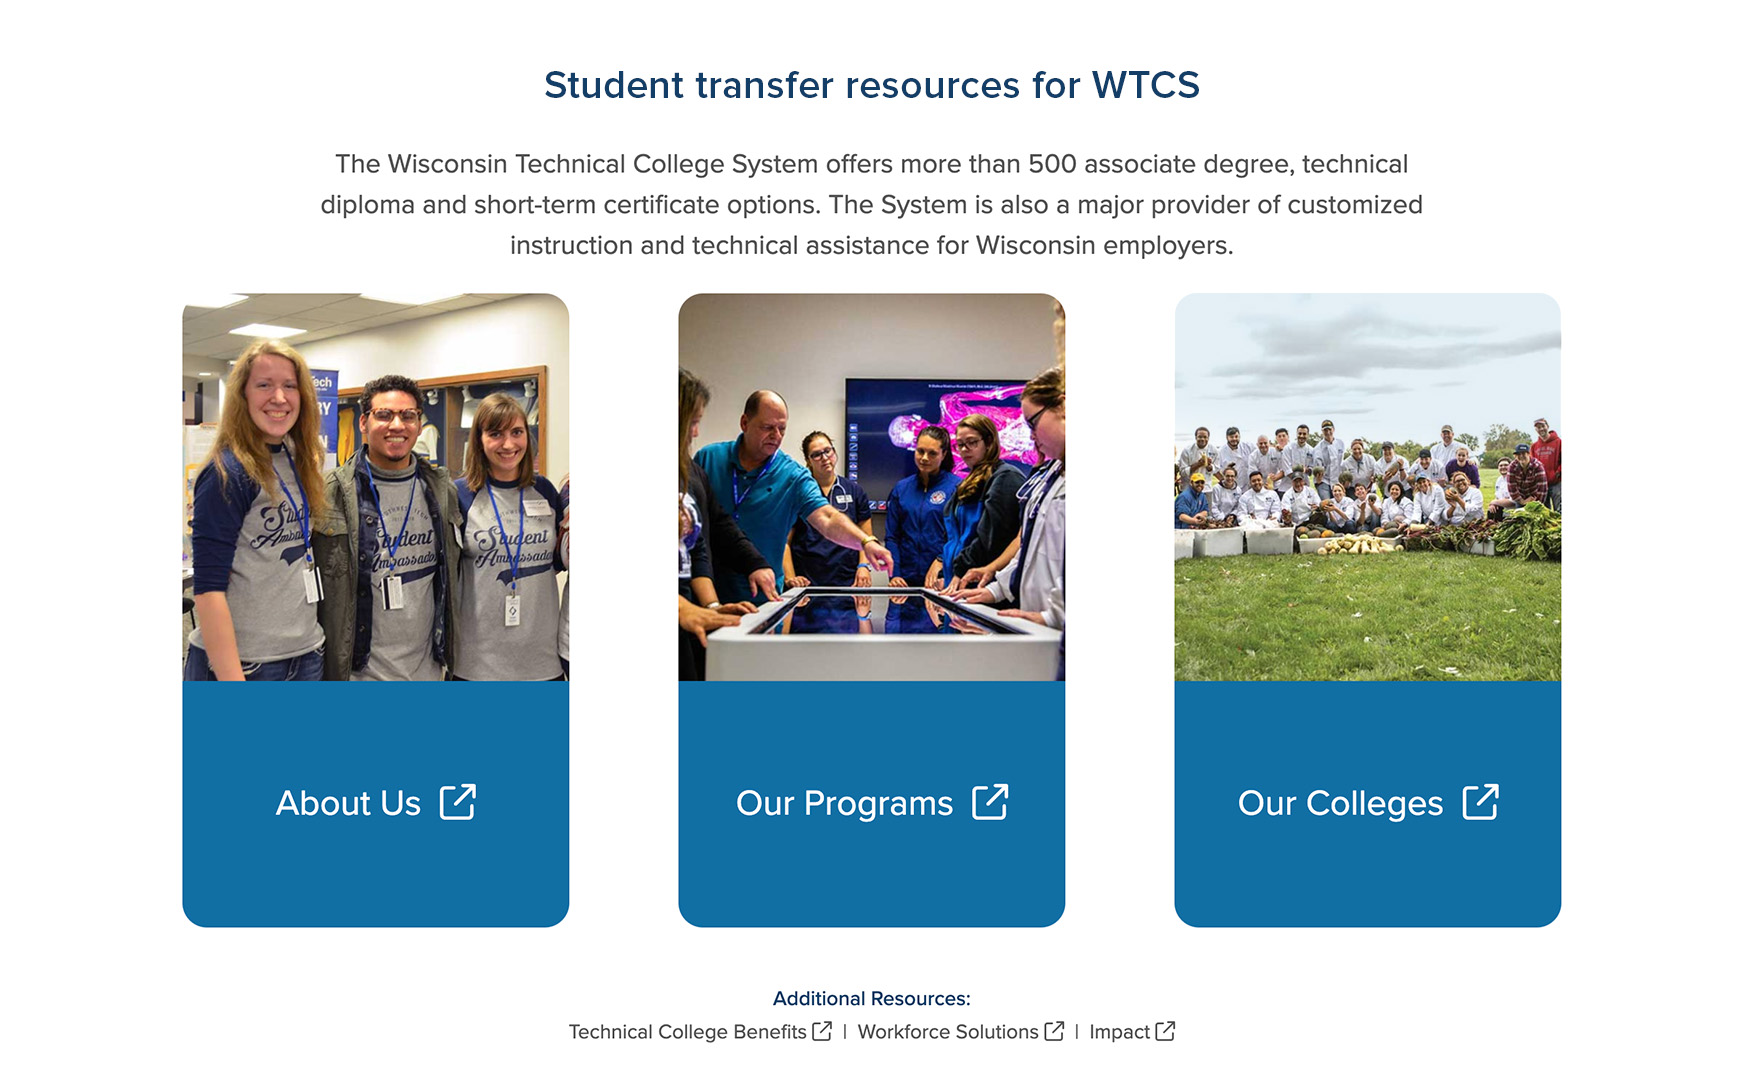 Example of image and text resource links within a state/system landing page. This landing page is a test example created by CollegeSource to demonstrate functionality and was not created by or endorsed by the Wisconsin Technical College System.